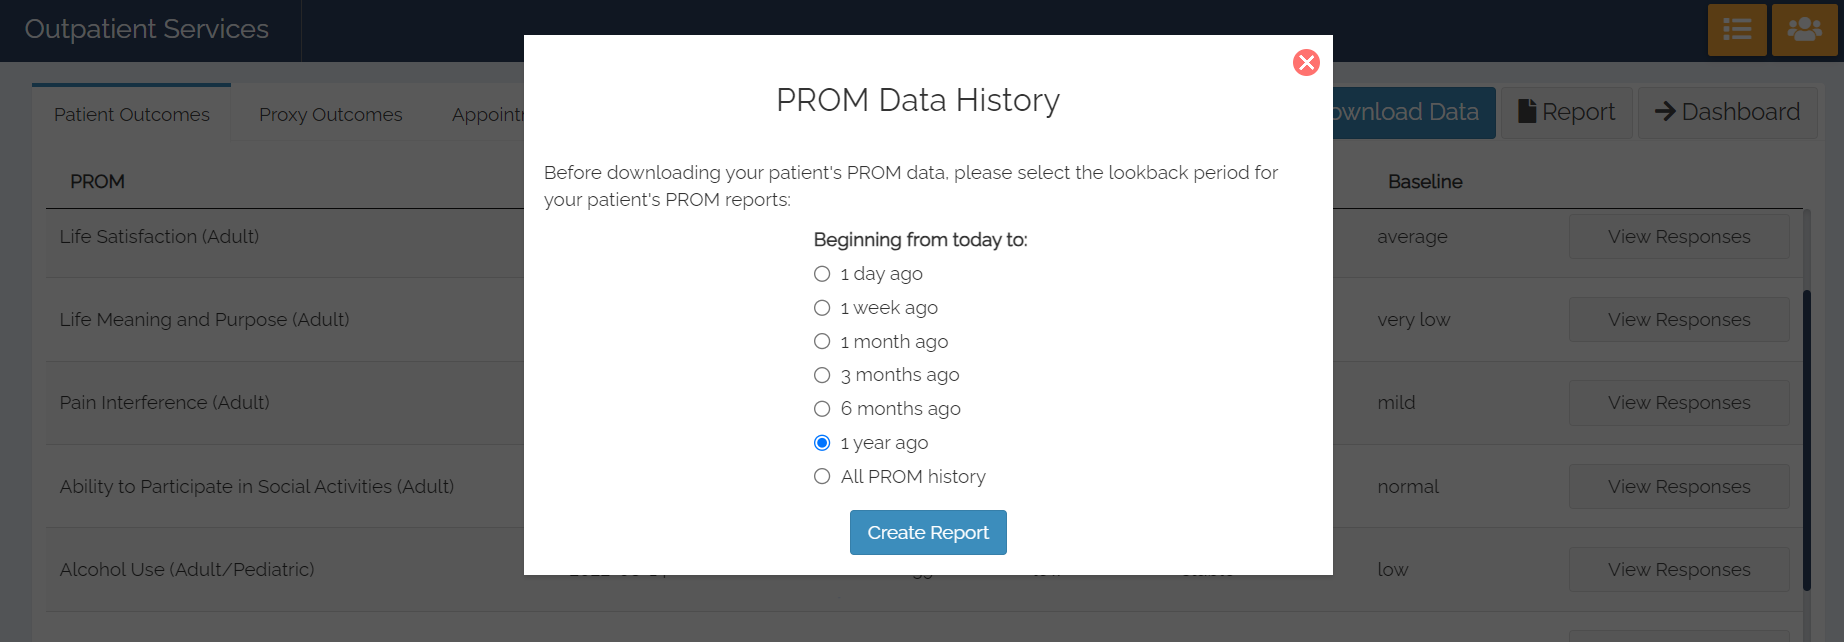 PROM data history selection for the PROM data download